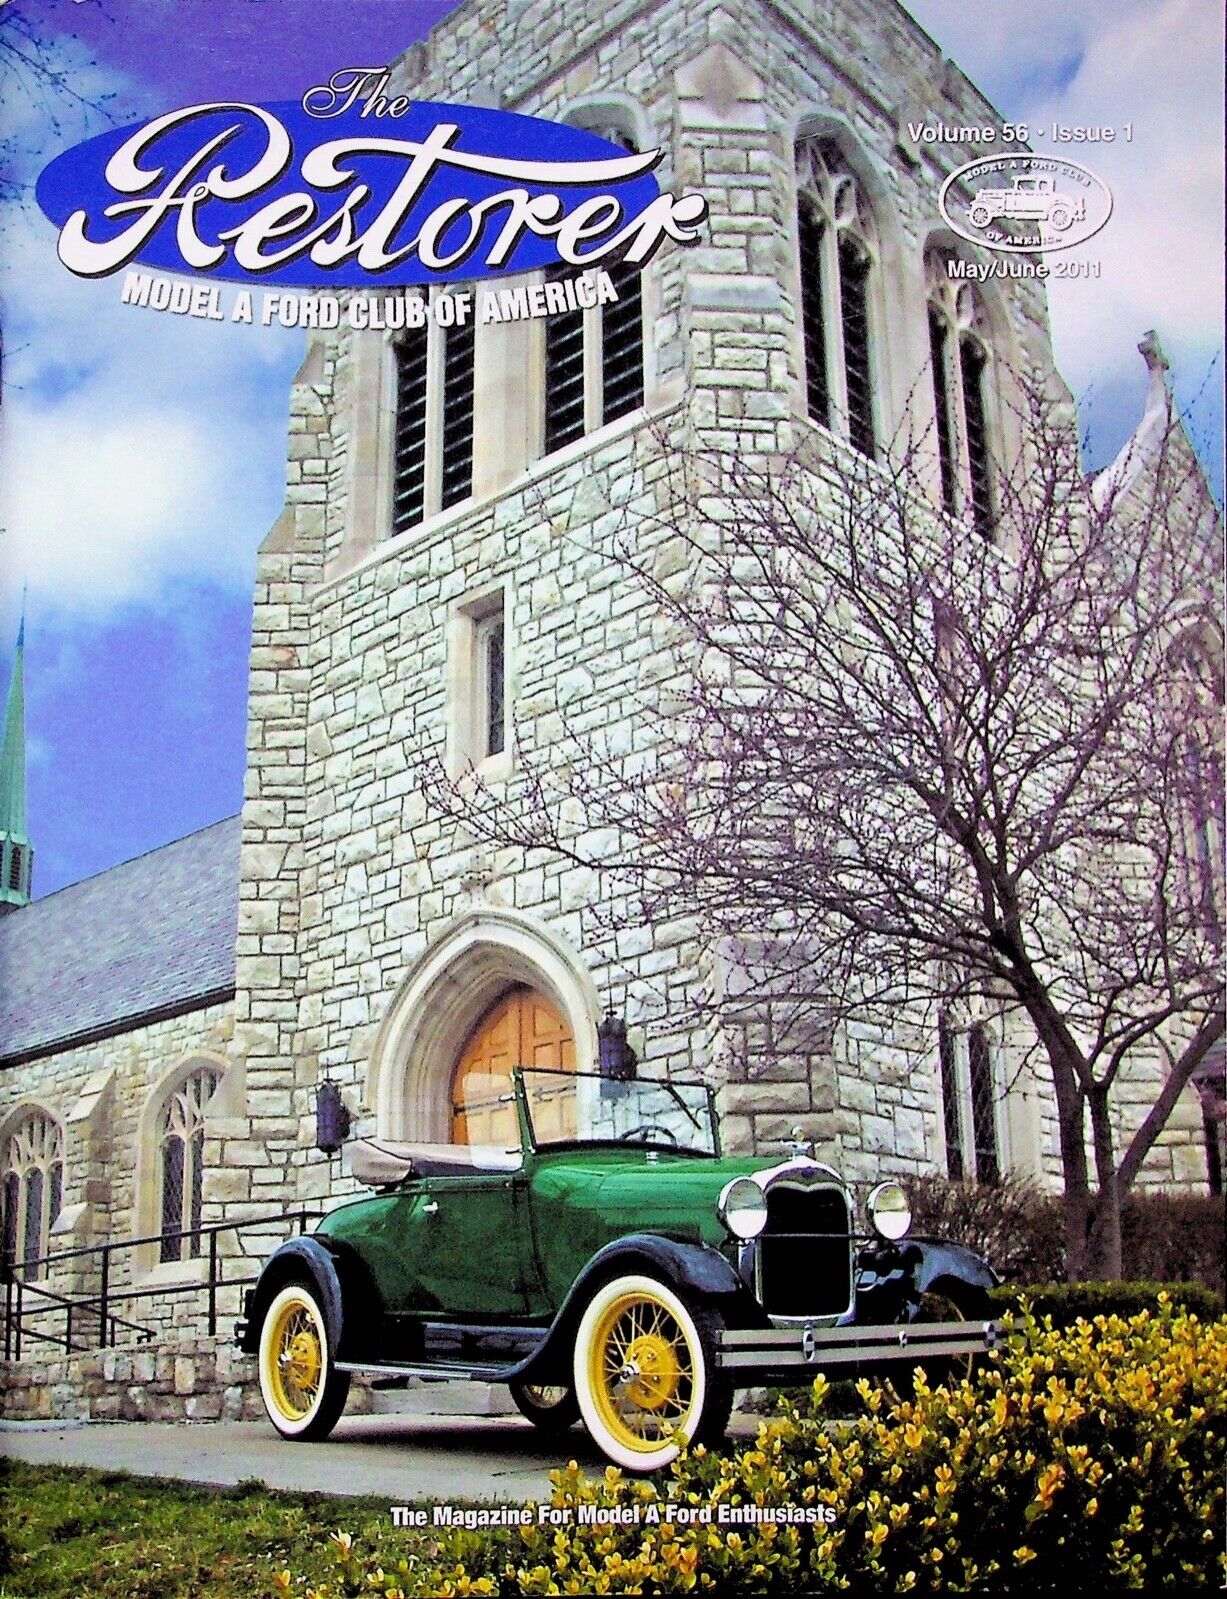 1929 ROADSTER - THE RESTORER CAR MAGAZINE - MODEL A FORD CLUB, MAY / JUNE 2011